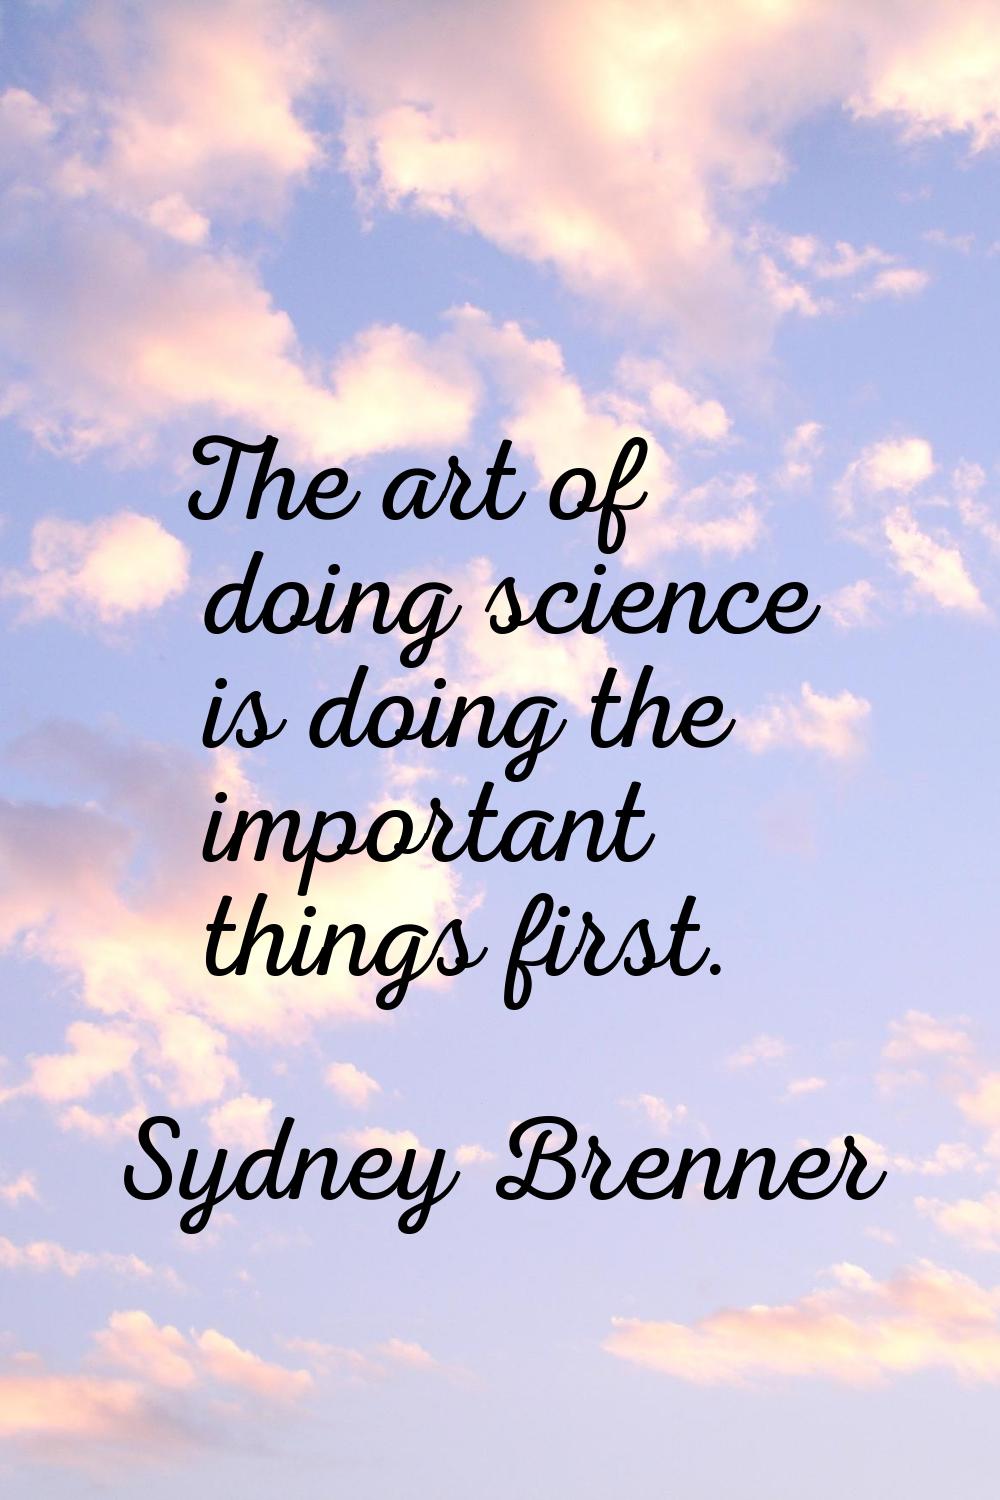 The art of doing science is doing the important things first.